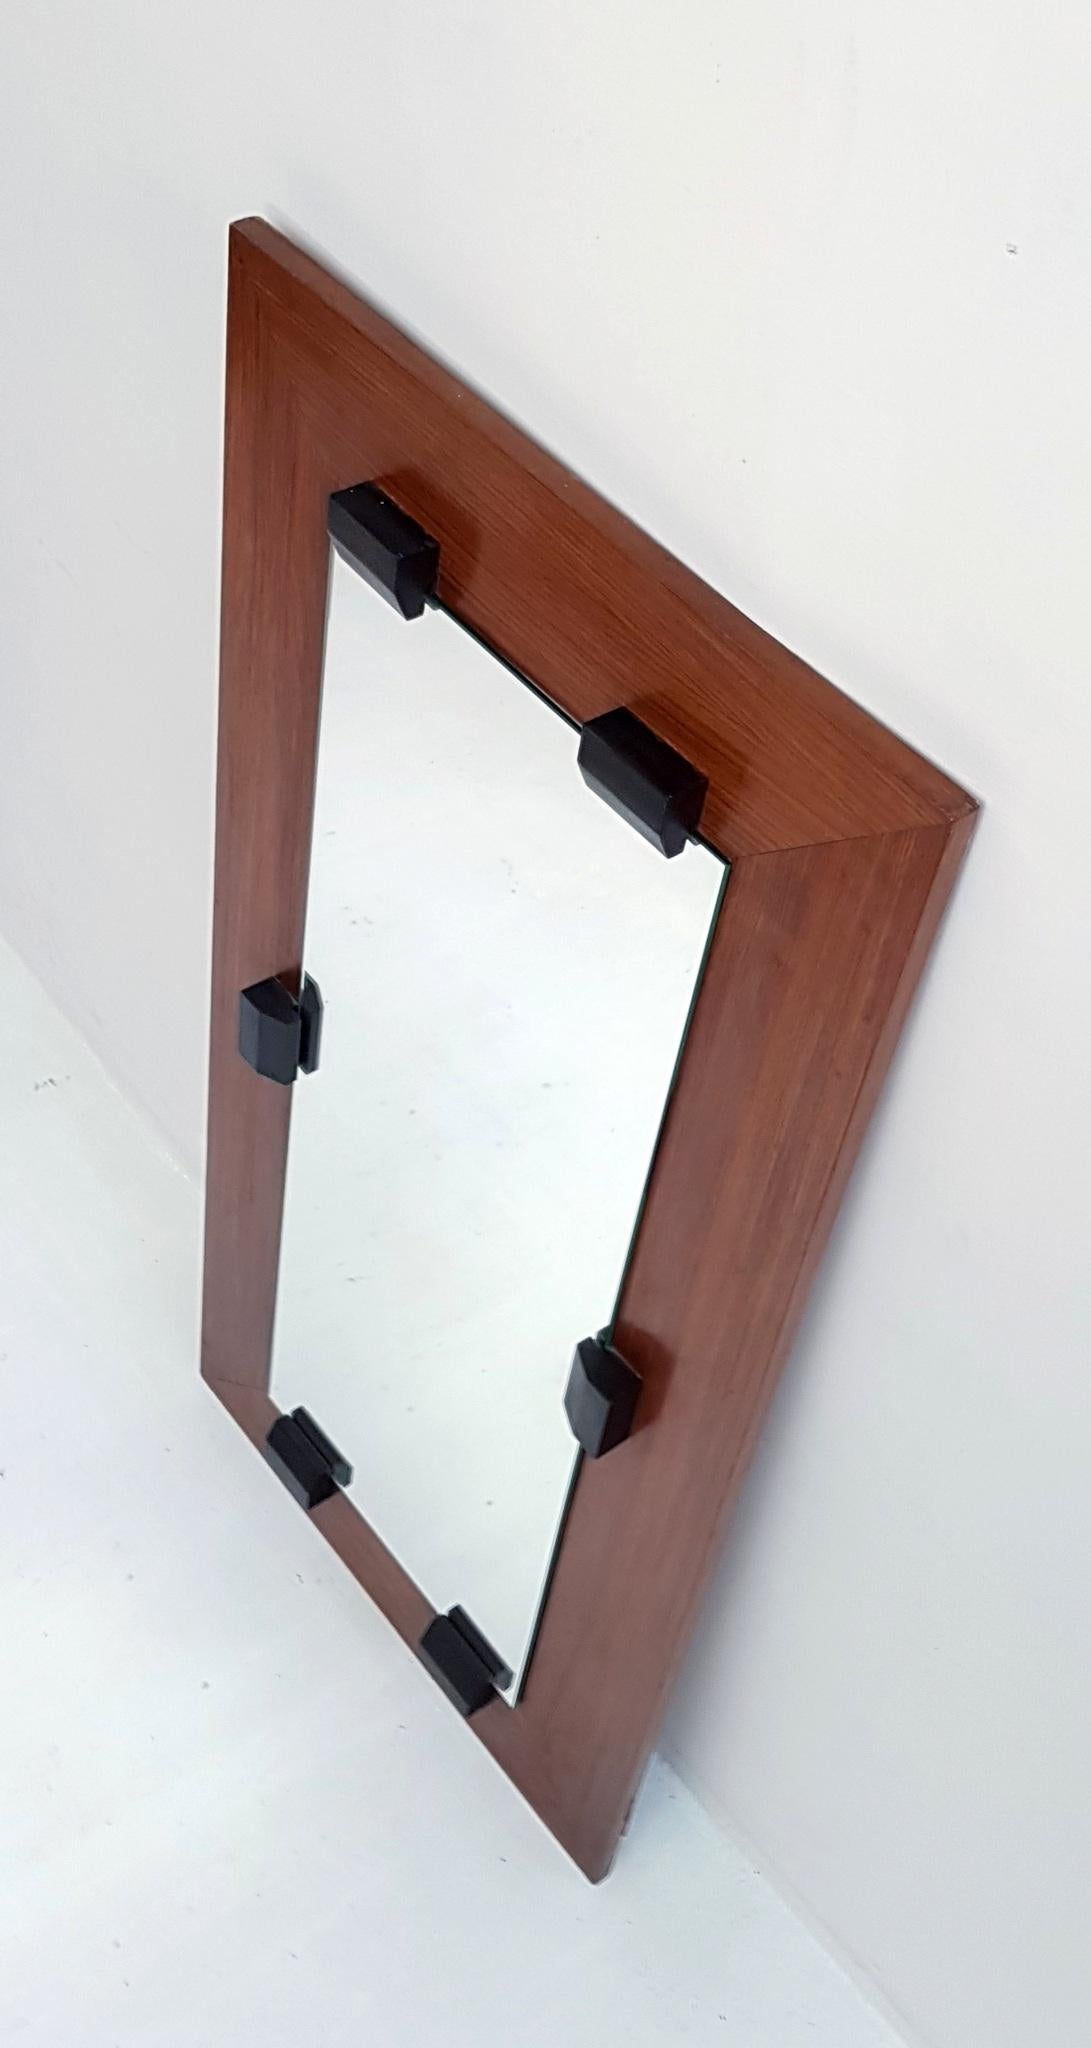 1960s rectangular mirror in walnut in a strict design from the late 1960s.